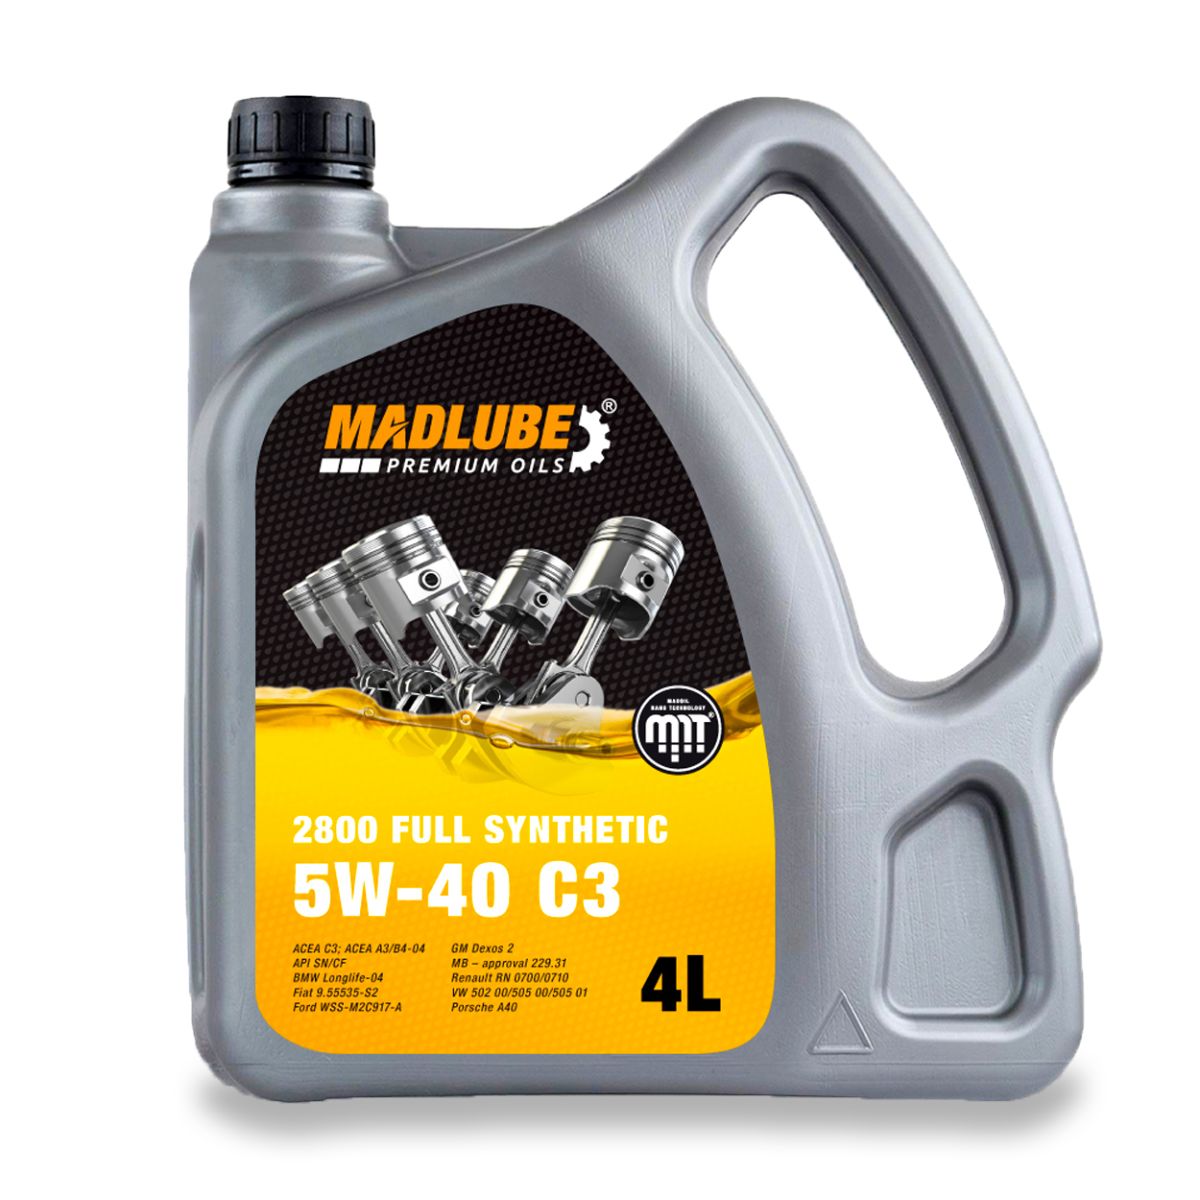 MadLube 2800 Full Synthetic 5W40 C3, 4L